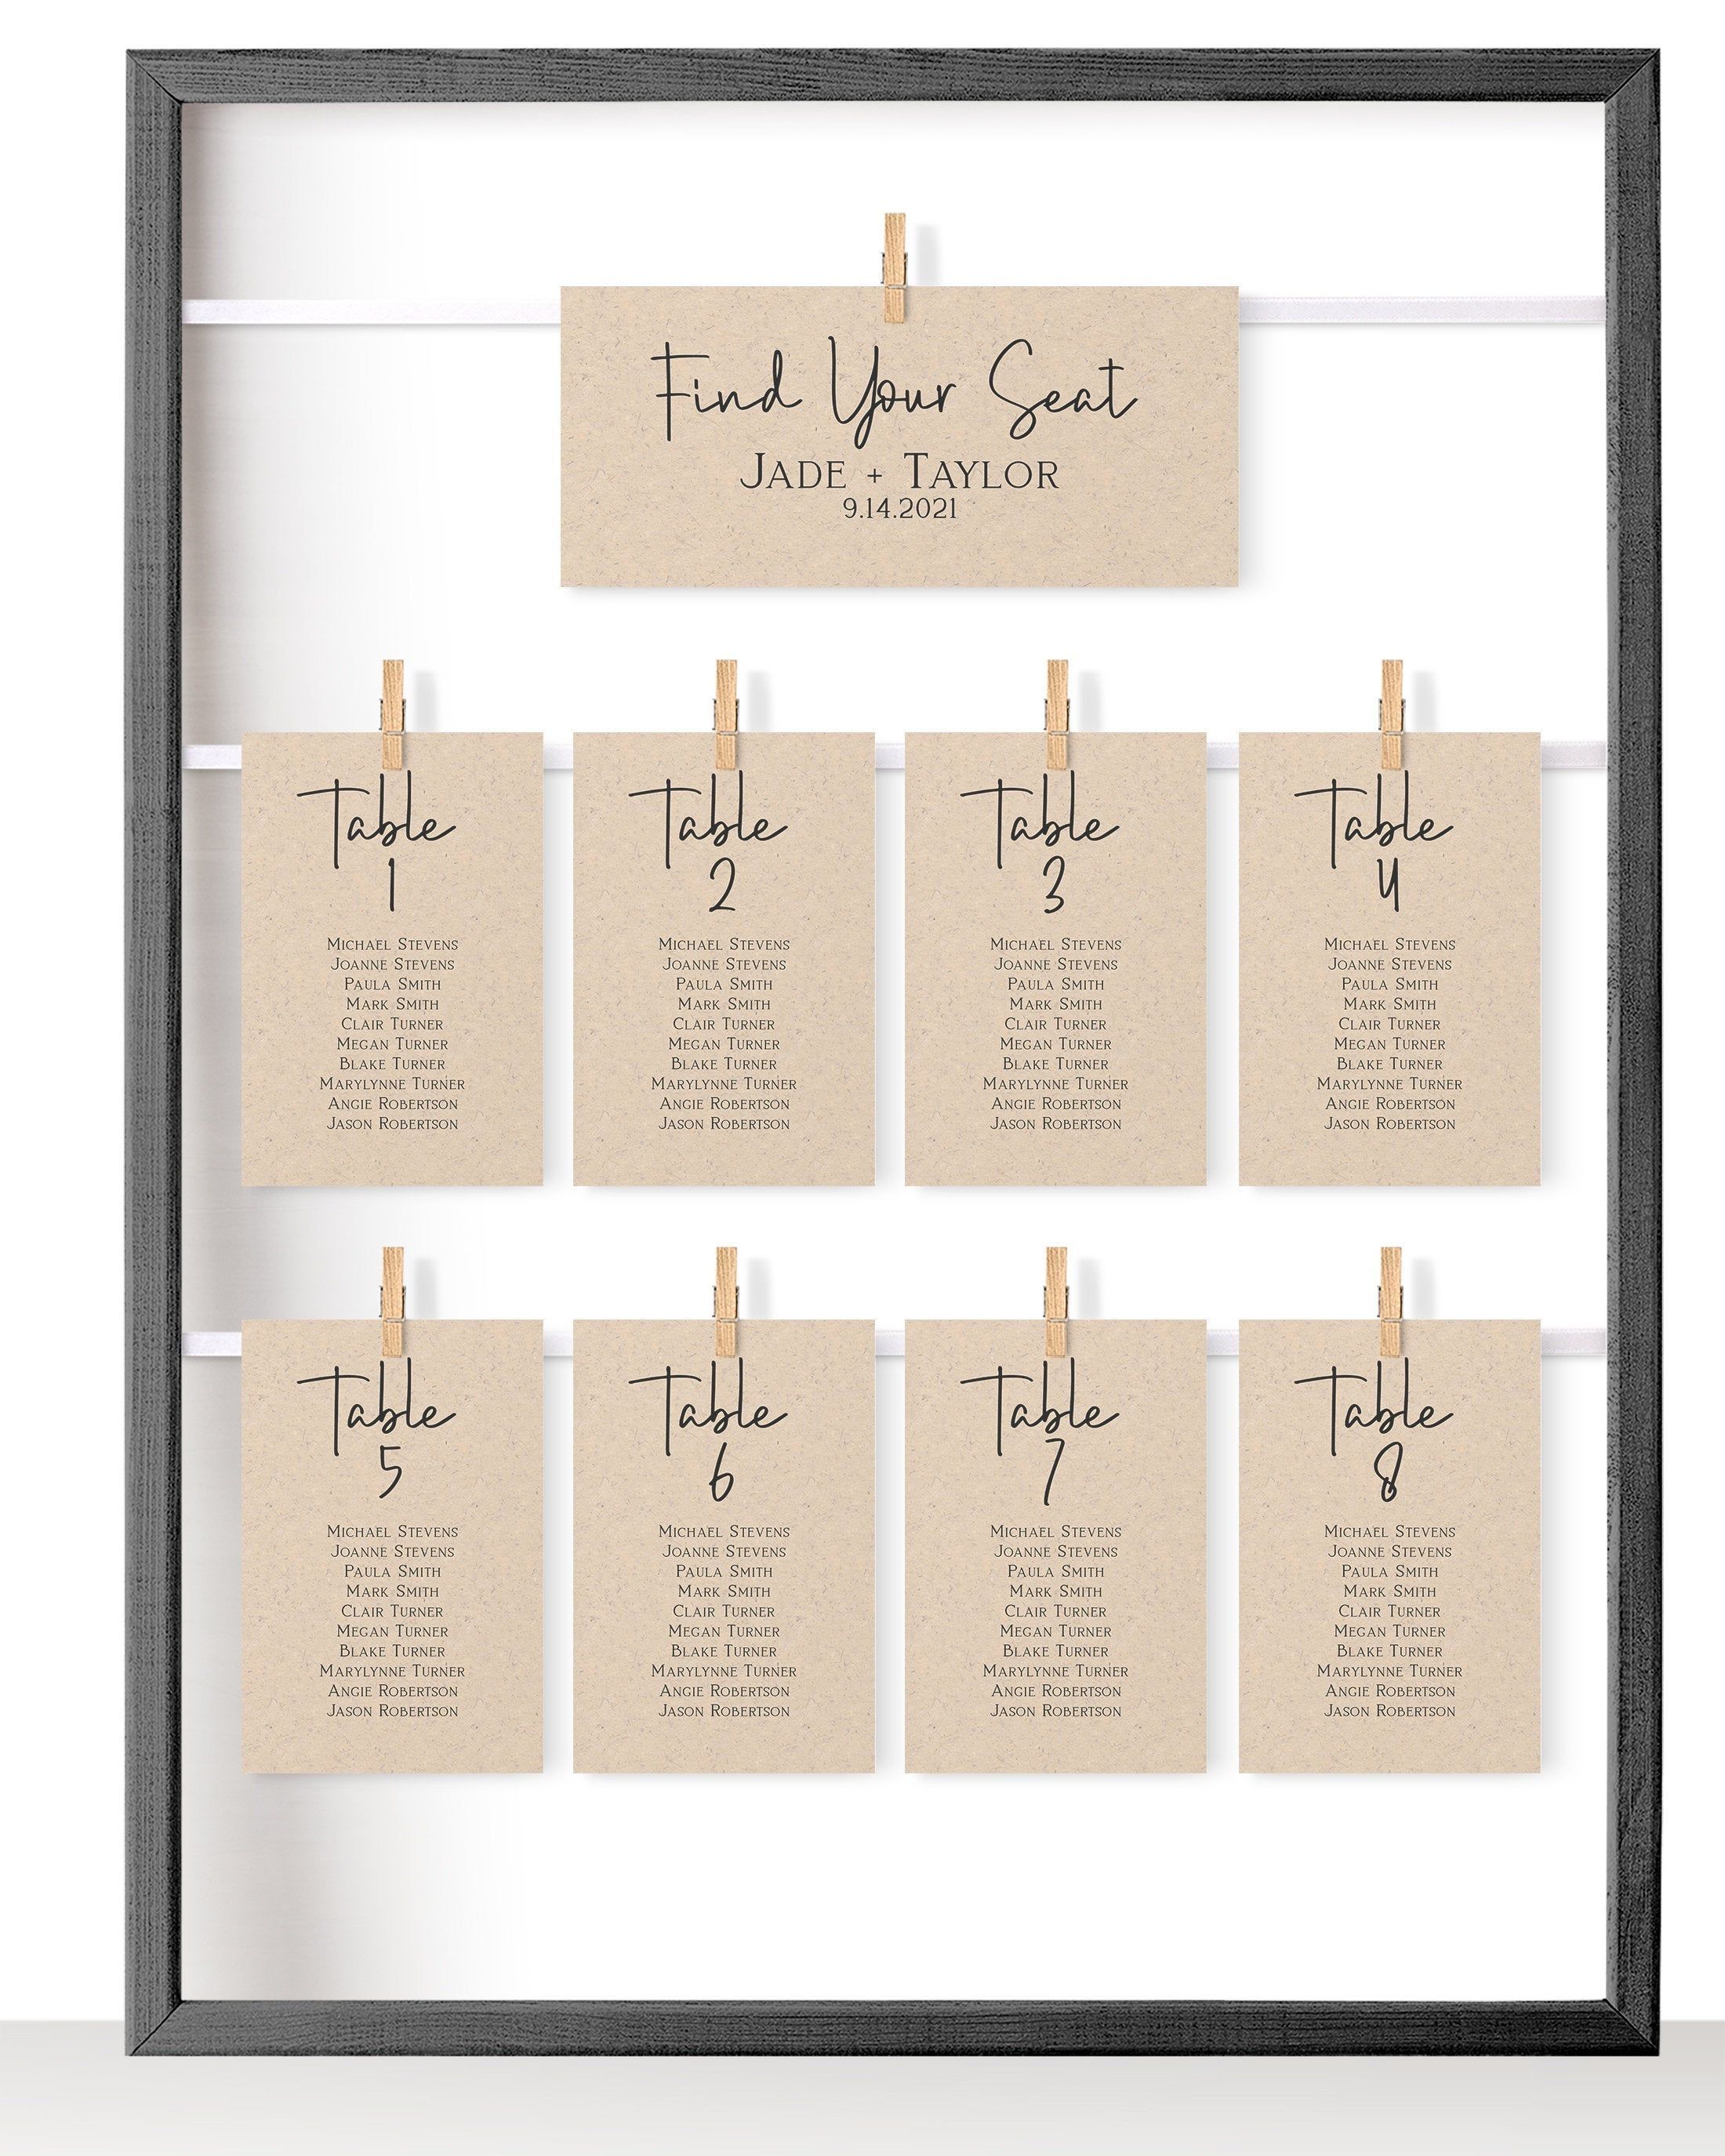 Wedding Seating Table Card, Seating Chart, Rustic Table Seating Plan 100% Editable Corjl PPW508 - Wedding Seating Table Card, Seating Chart, Rustic Table Seating Plan 100% Editable Corjl PPW508 -   25 diy Wedding seating chart ideas